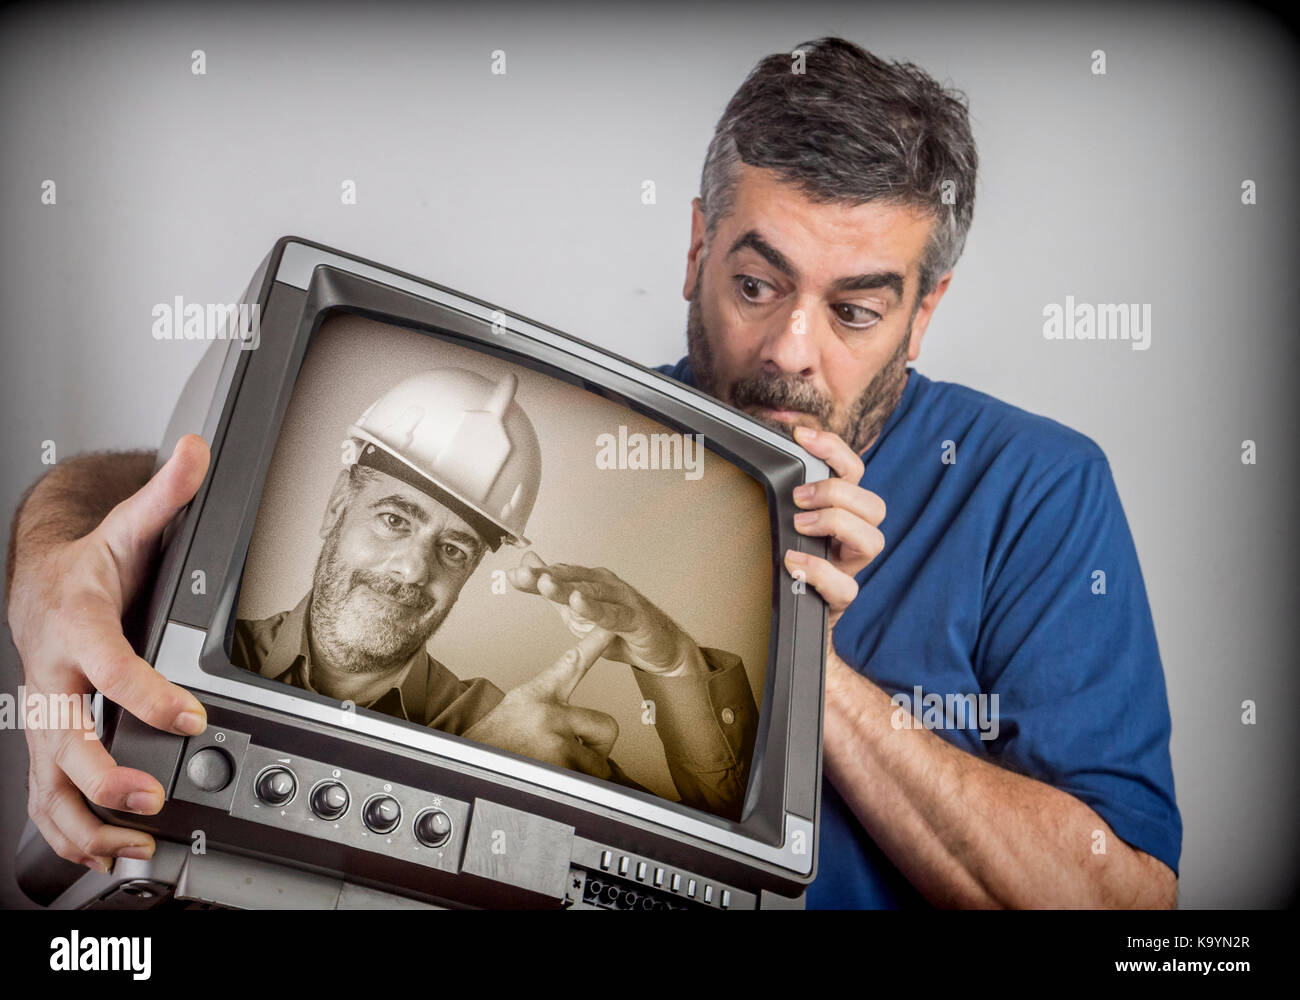 Man subject astonished a TV that is dressed as a stonemason the same Stock Photo